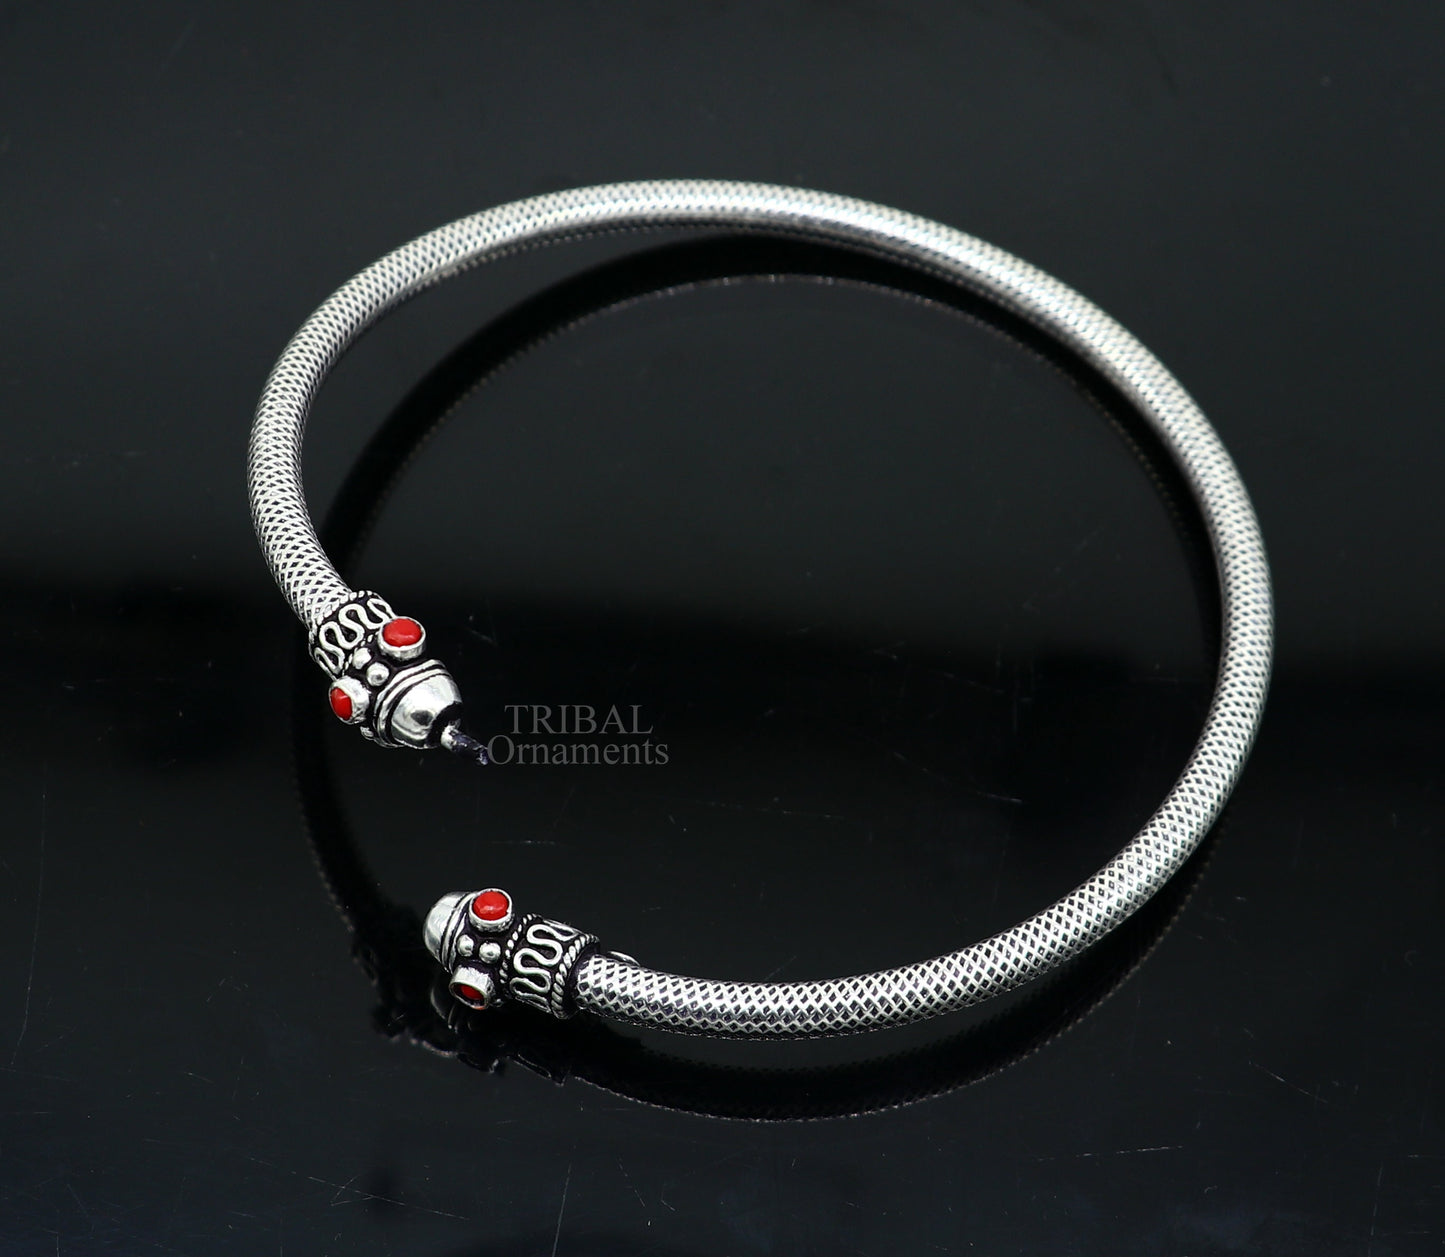 925 sterling silver handmade vintage design stunning foot bracelet ankle kada excellent coral stone belly dance ethnic jewelry Rnsfk44 - TRIBAL ORNAMENTS